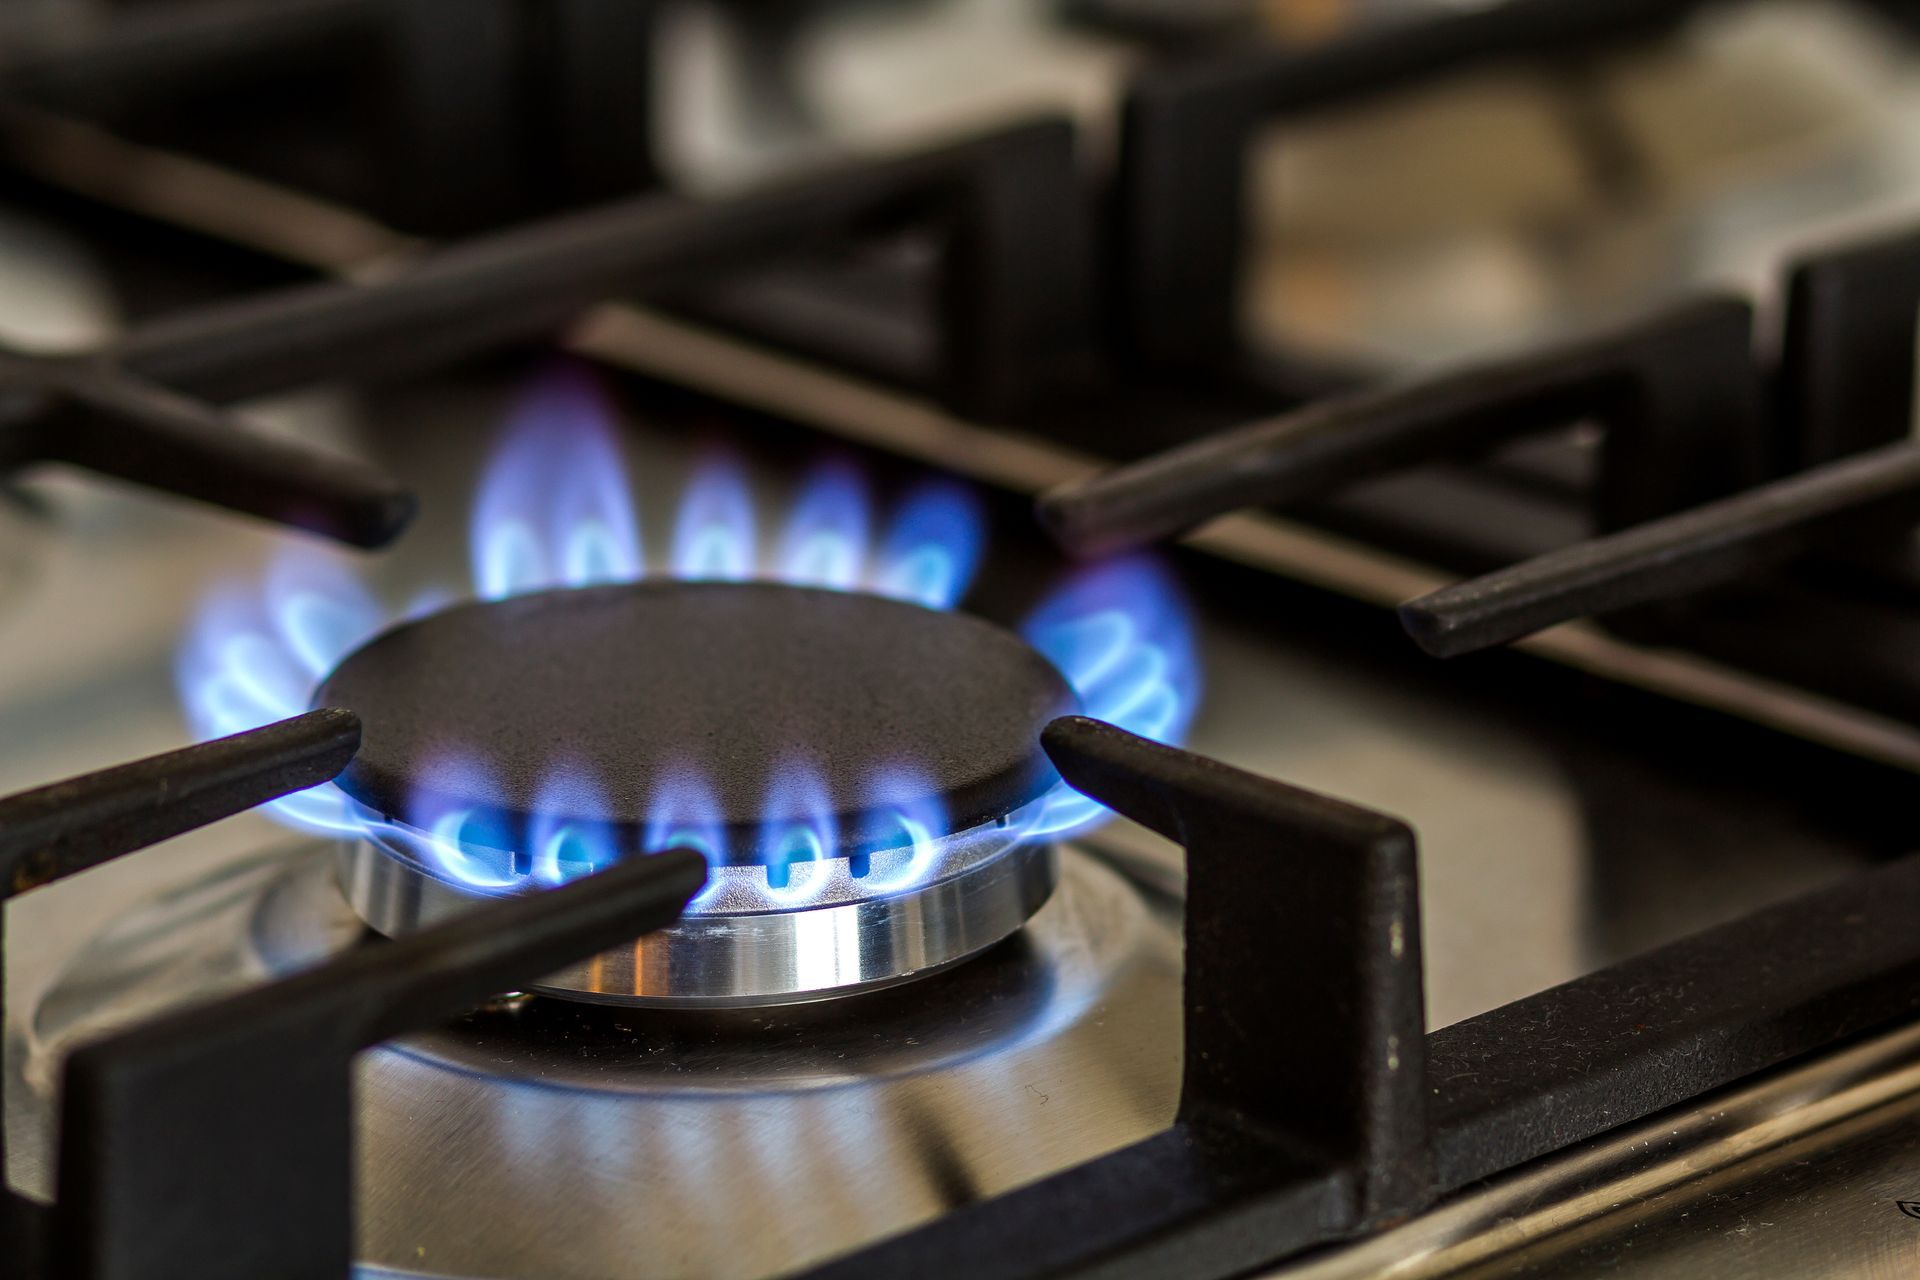 An illuminated gas stove burner in a dimly lit kitchen, with natural gas flames burning brightly.